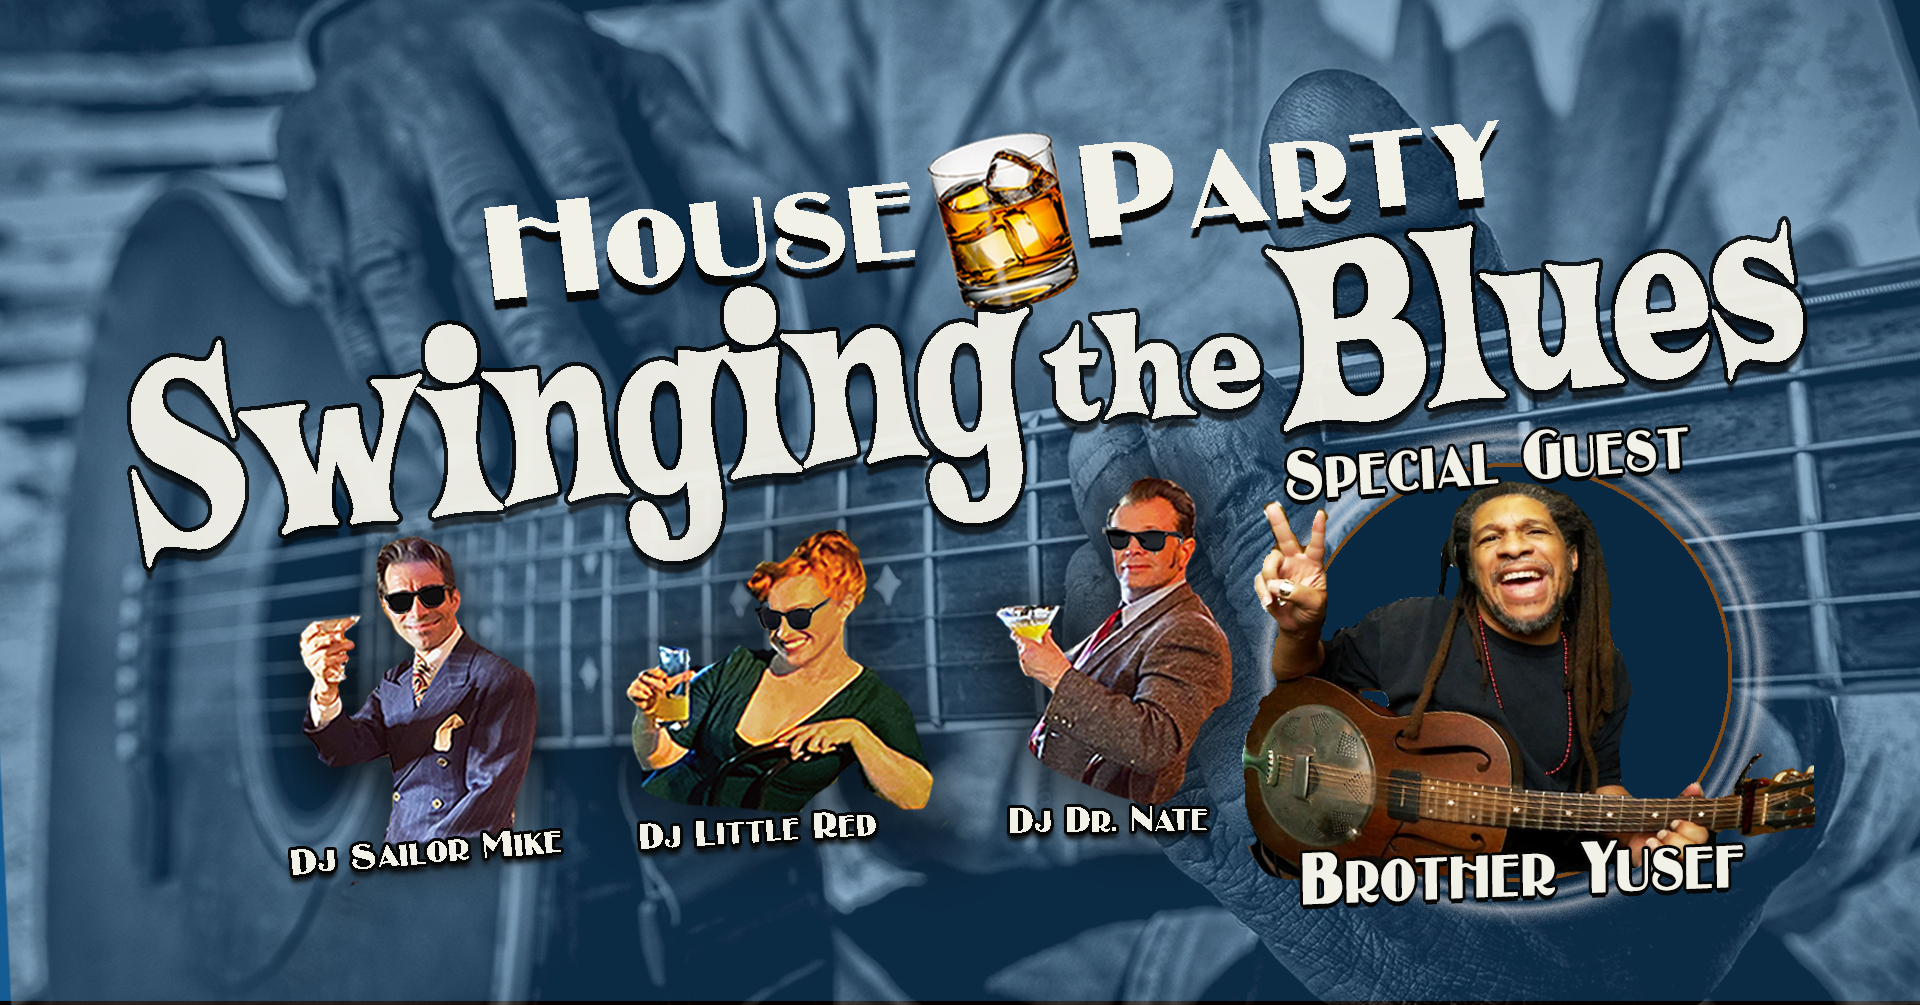 SWINGING THE BLUES HOUSE PARTY with DJ DR NATE, SAILOR MIKE and LITTLE RED at The Moose!